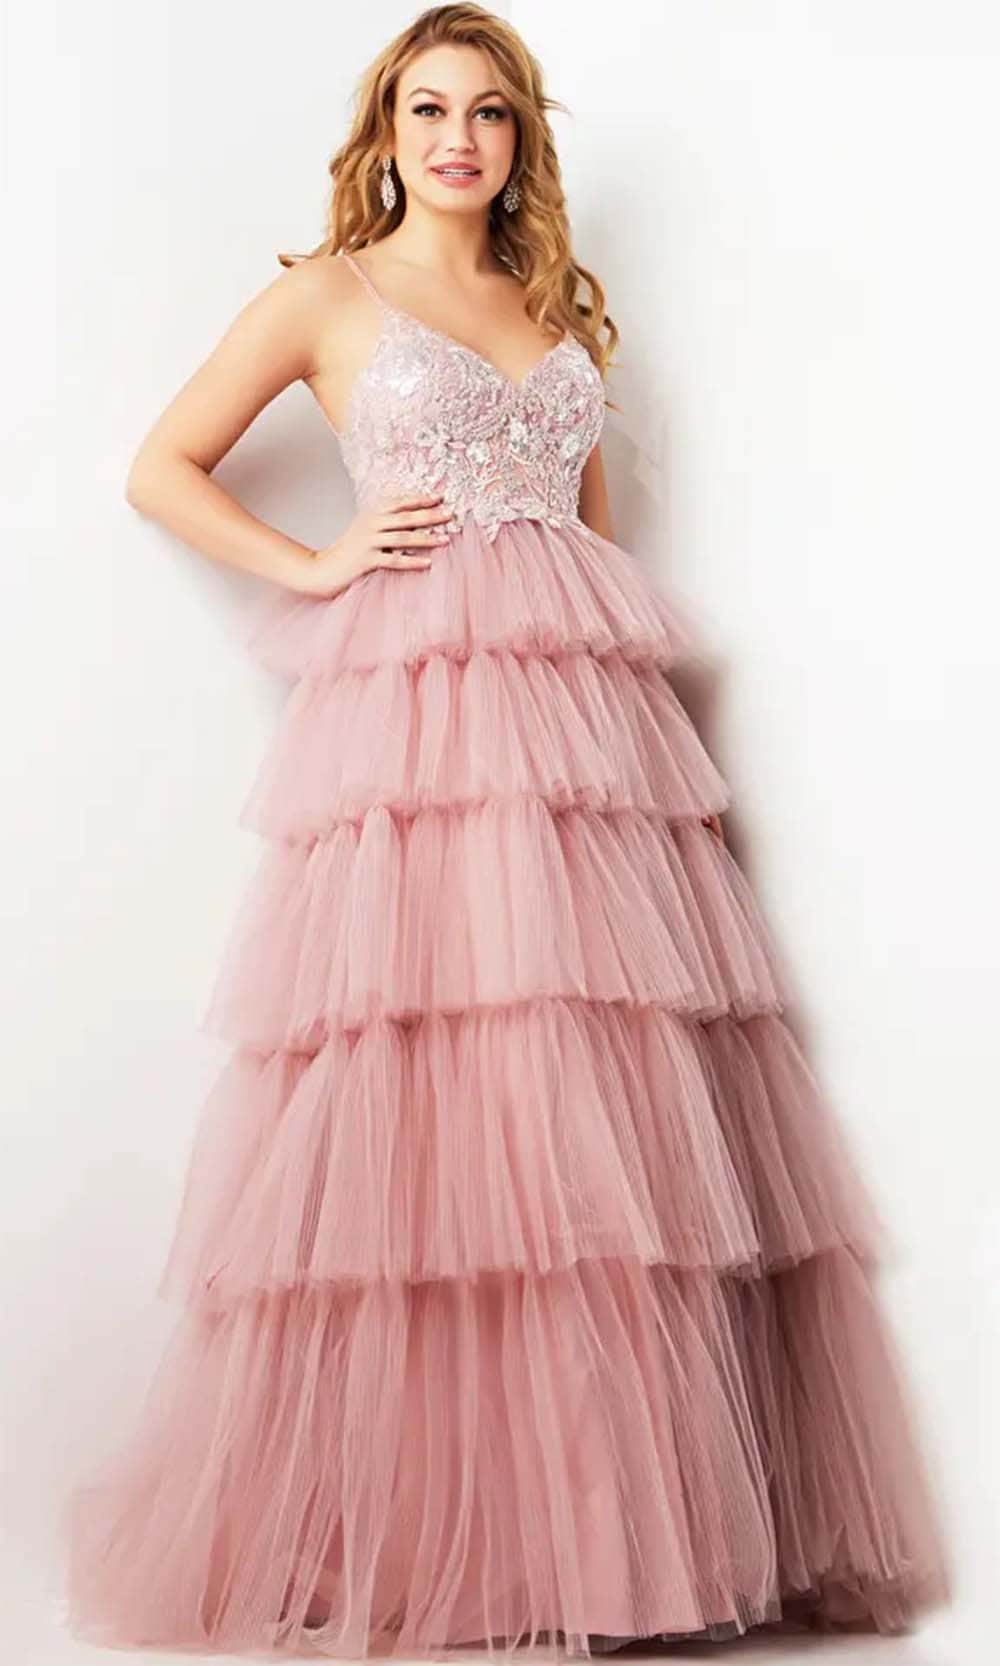 Jovani 38577 - Embellished Sweetheart Neck Gown Prom Dresses Dresses 00 / Dusty Pink